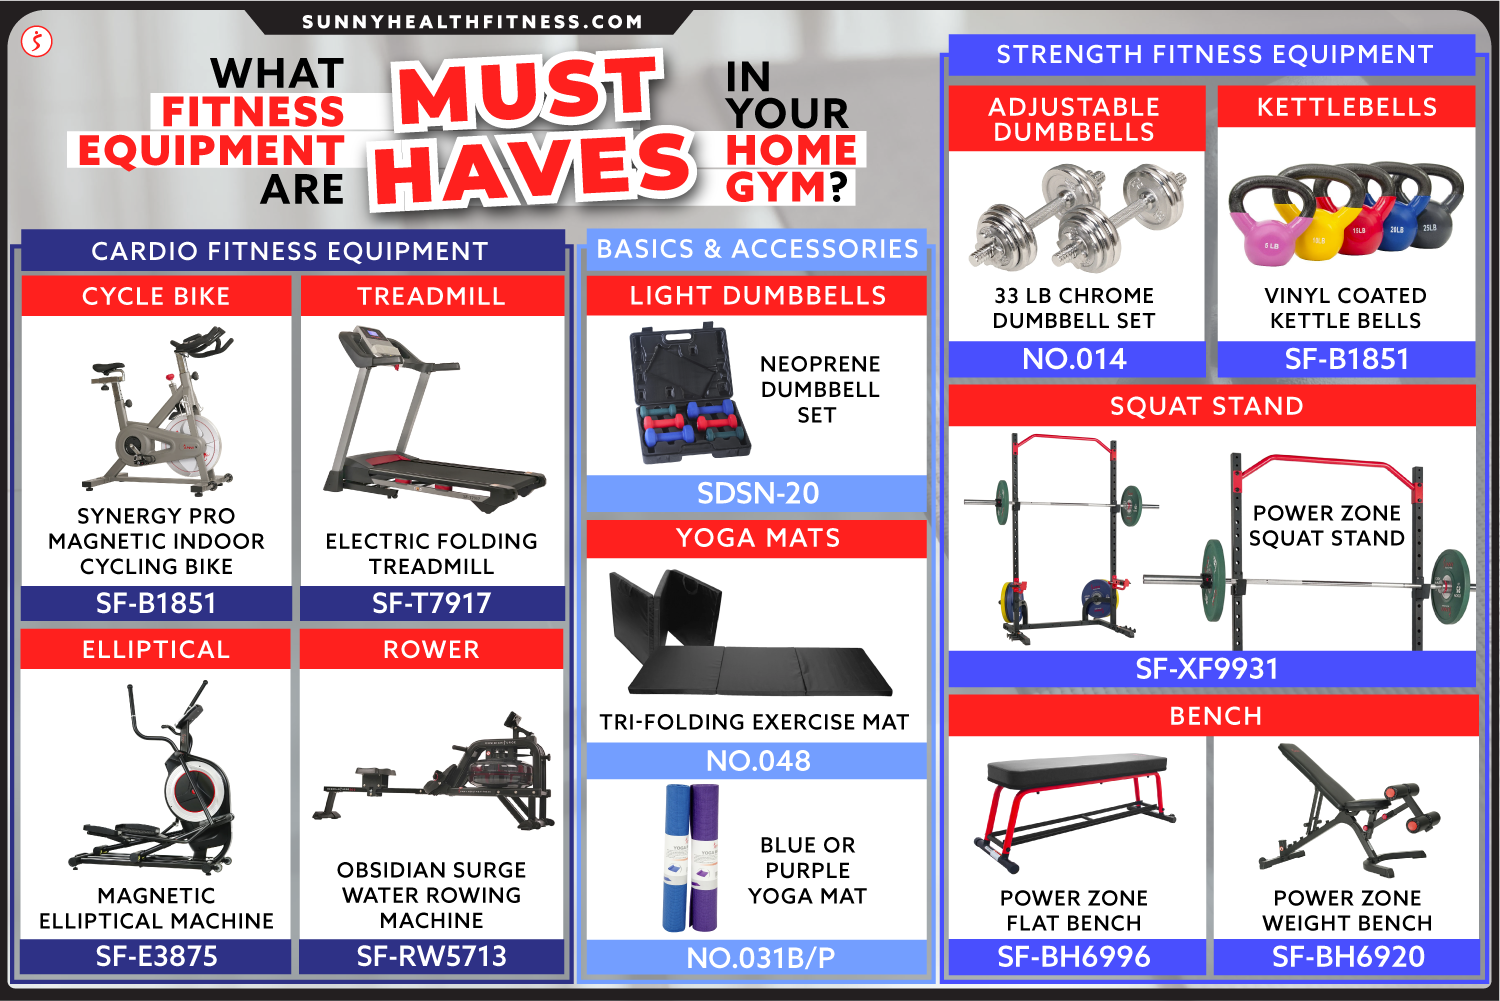 Buyer's Guide - Choosing the Right Home Gym Equipment - MAJOR